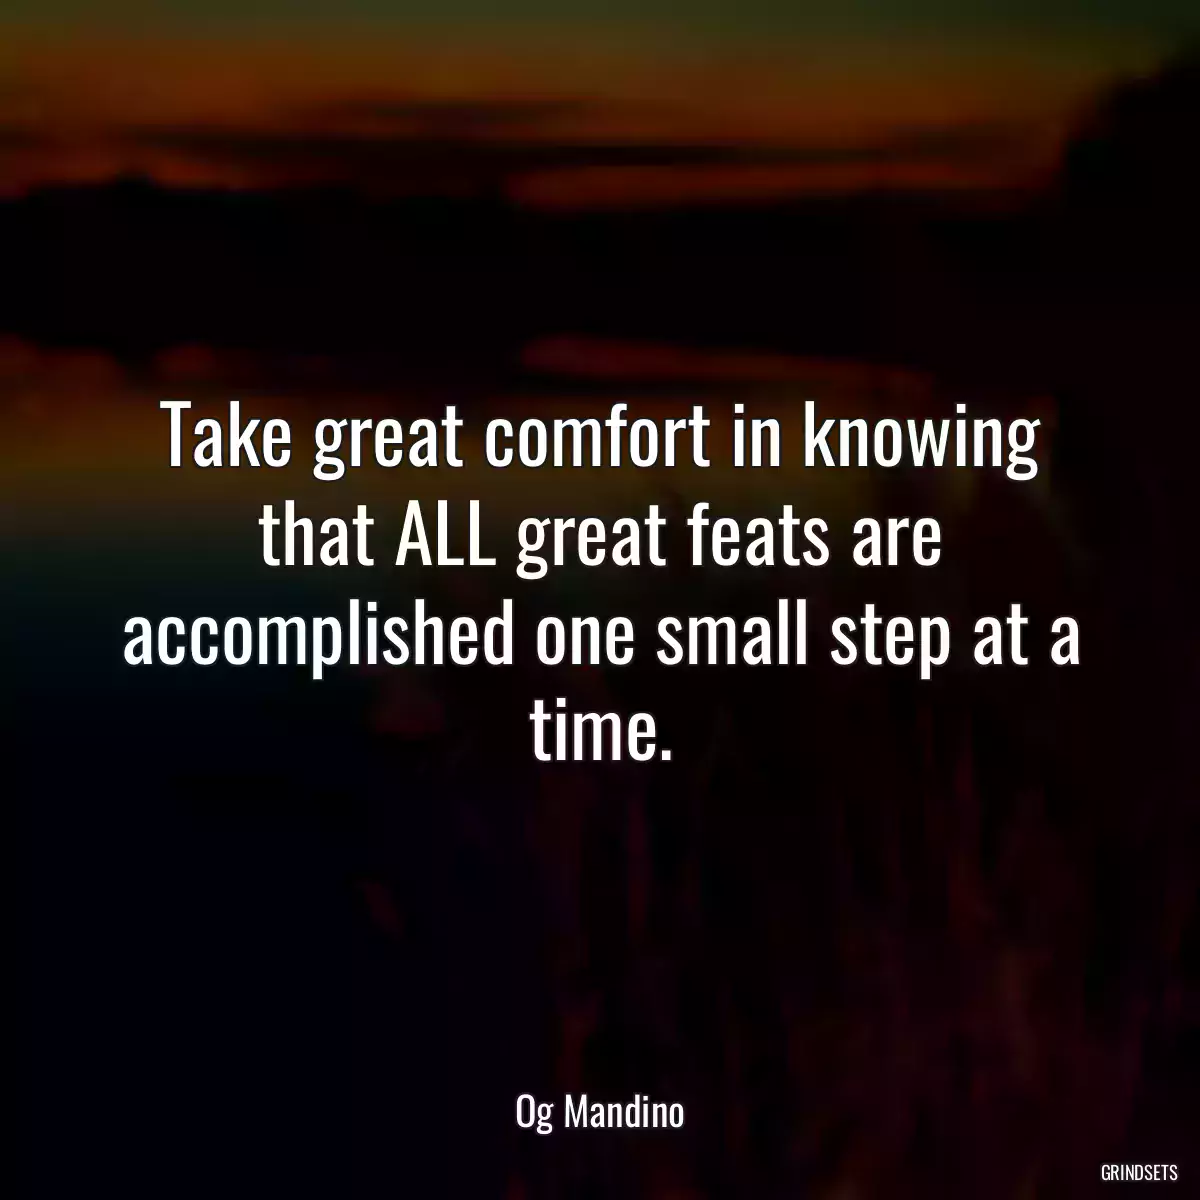 Take great comfort in knowing that ALL great feats are accomplished one small step at a time.